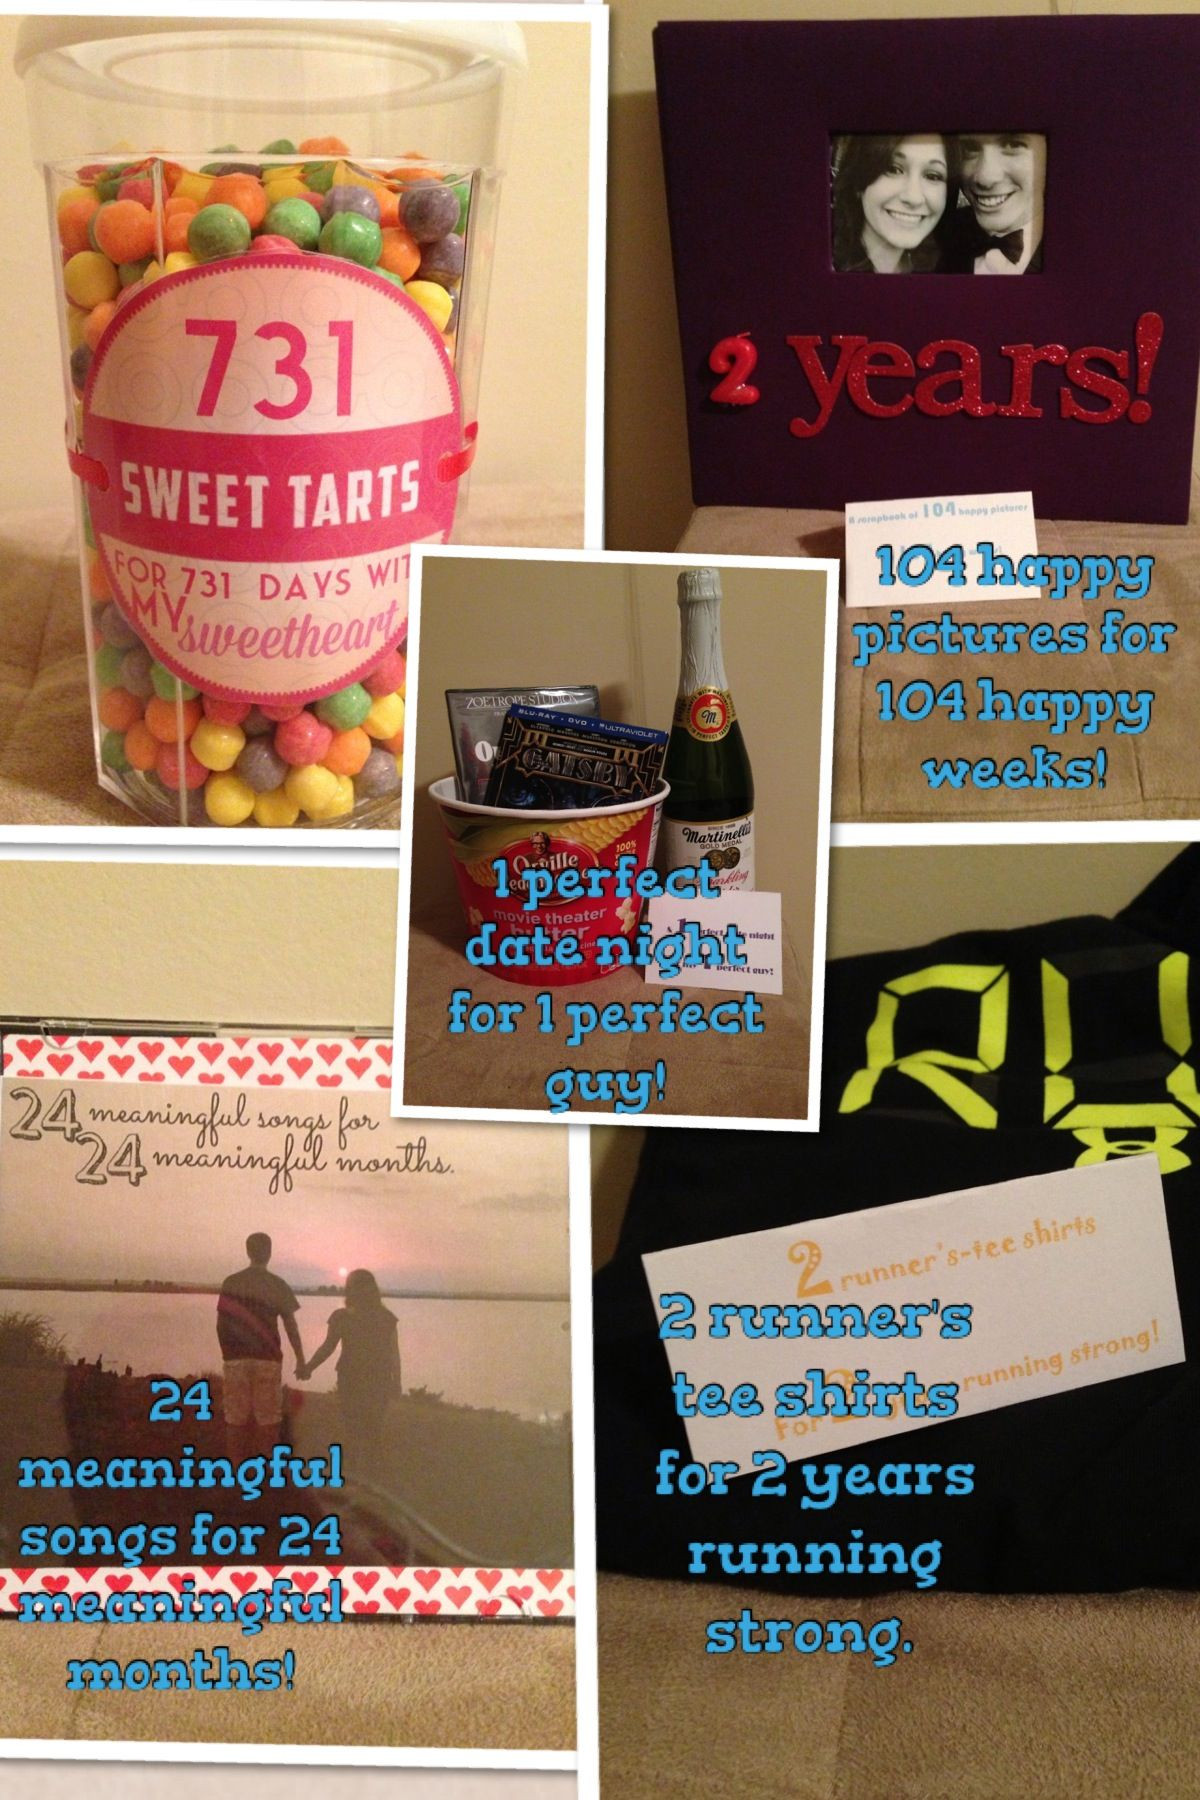 2 Year Dating Anniversary Gift Ideas For Him
 Gift Ideas For Boyfriend For e Year Anniversary